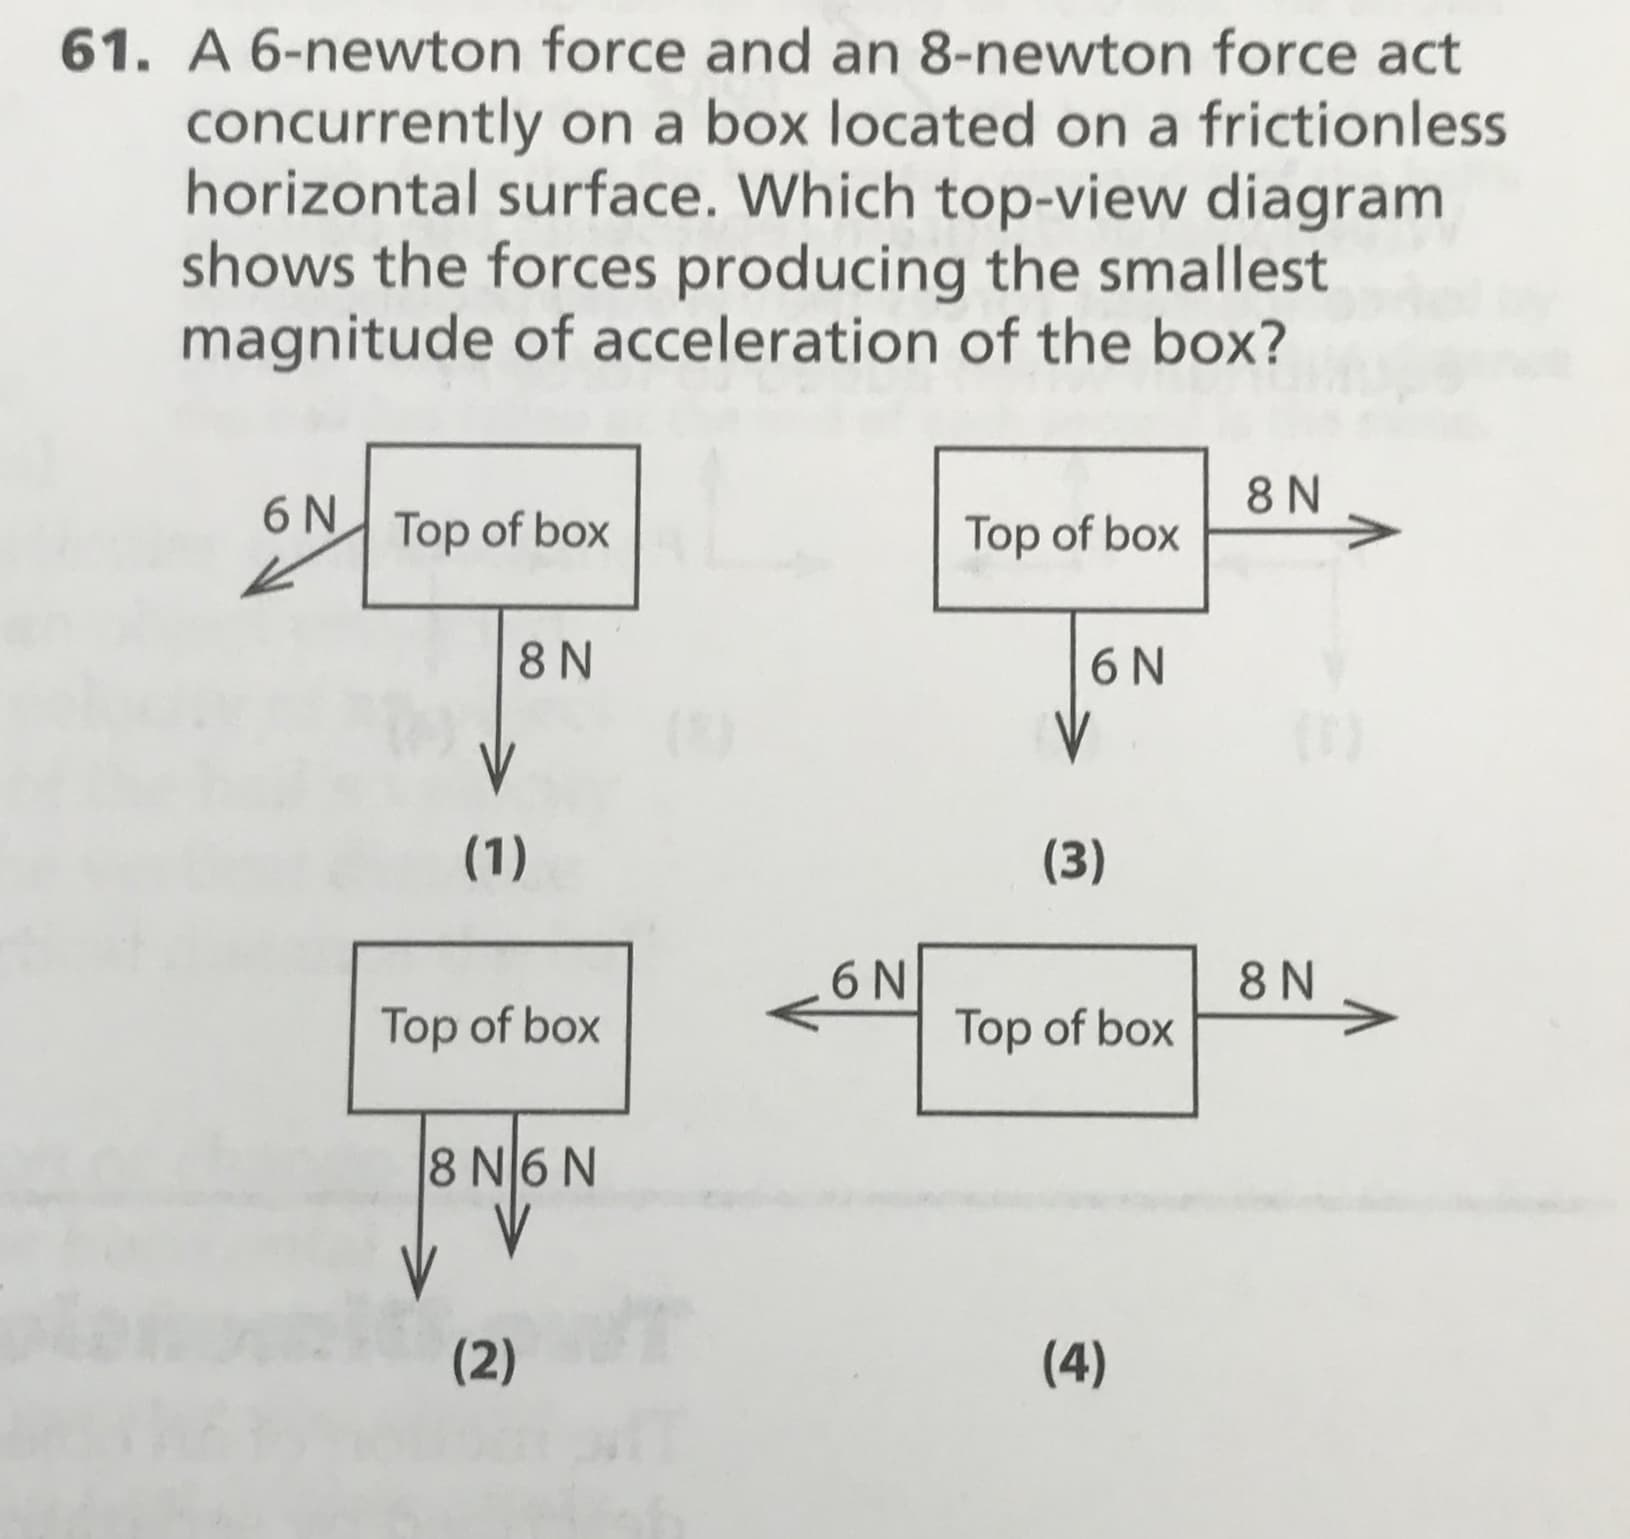 61. A 6-newton force and an 8-newton force act
concurrently on a box located on a frictionless
horizontal surface. Which top-view diagram
shows the forces producing the smallest
magnitude of acceleration of the box?
8 N
6 N
Top of box
Top of box
8 N
6N
V
(1)
(3)
6N
Top of box
8 N
Top of box
8 N6 N
(2)
(4)
IN
